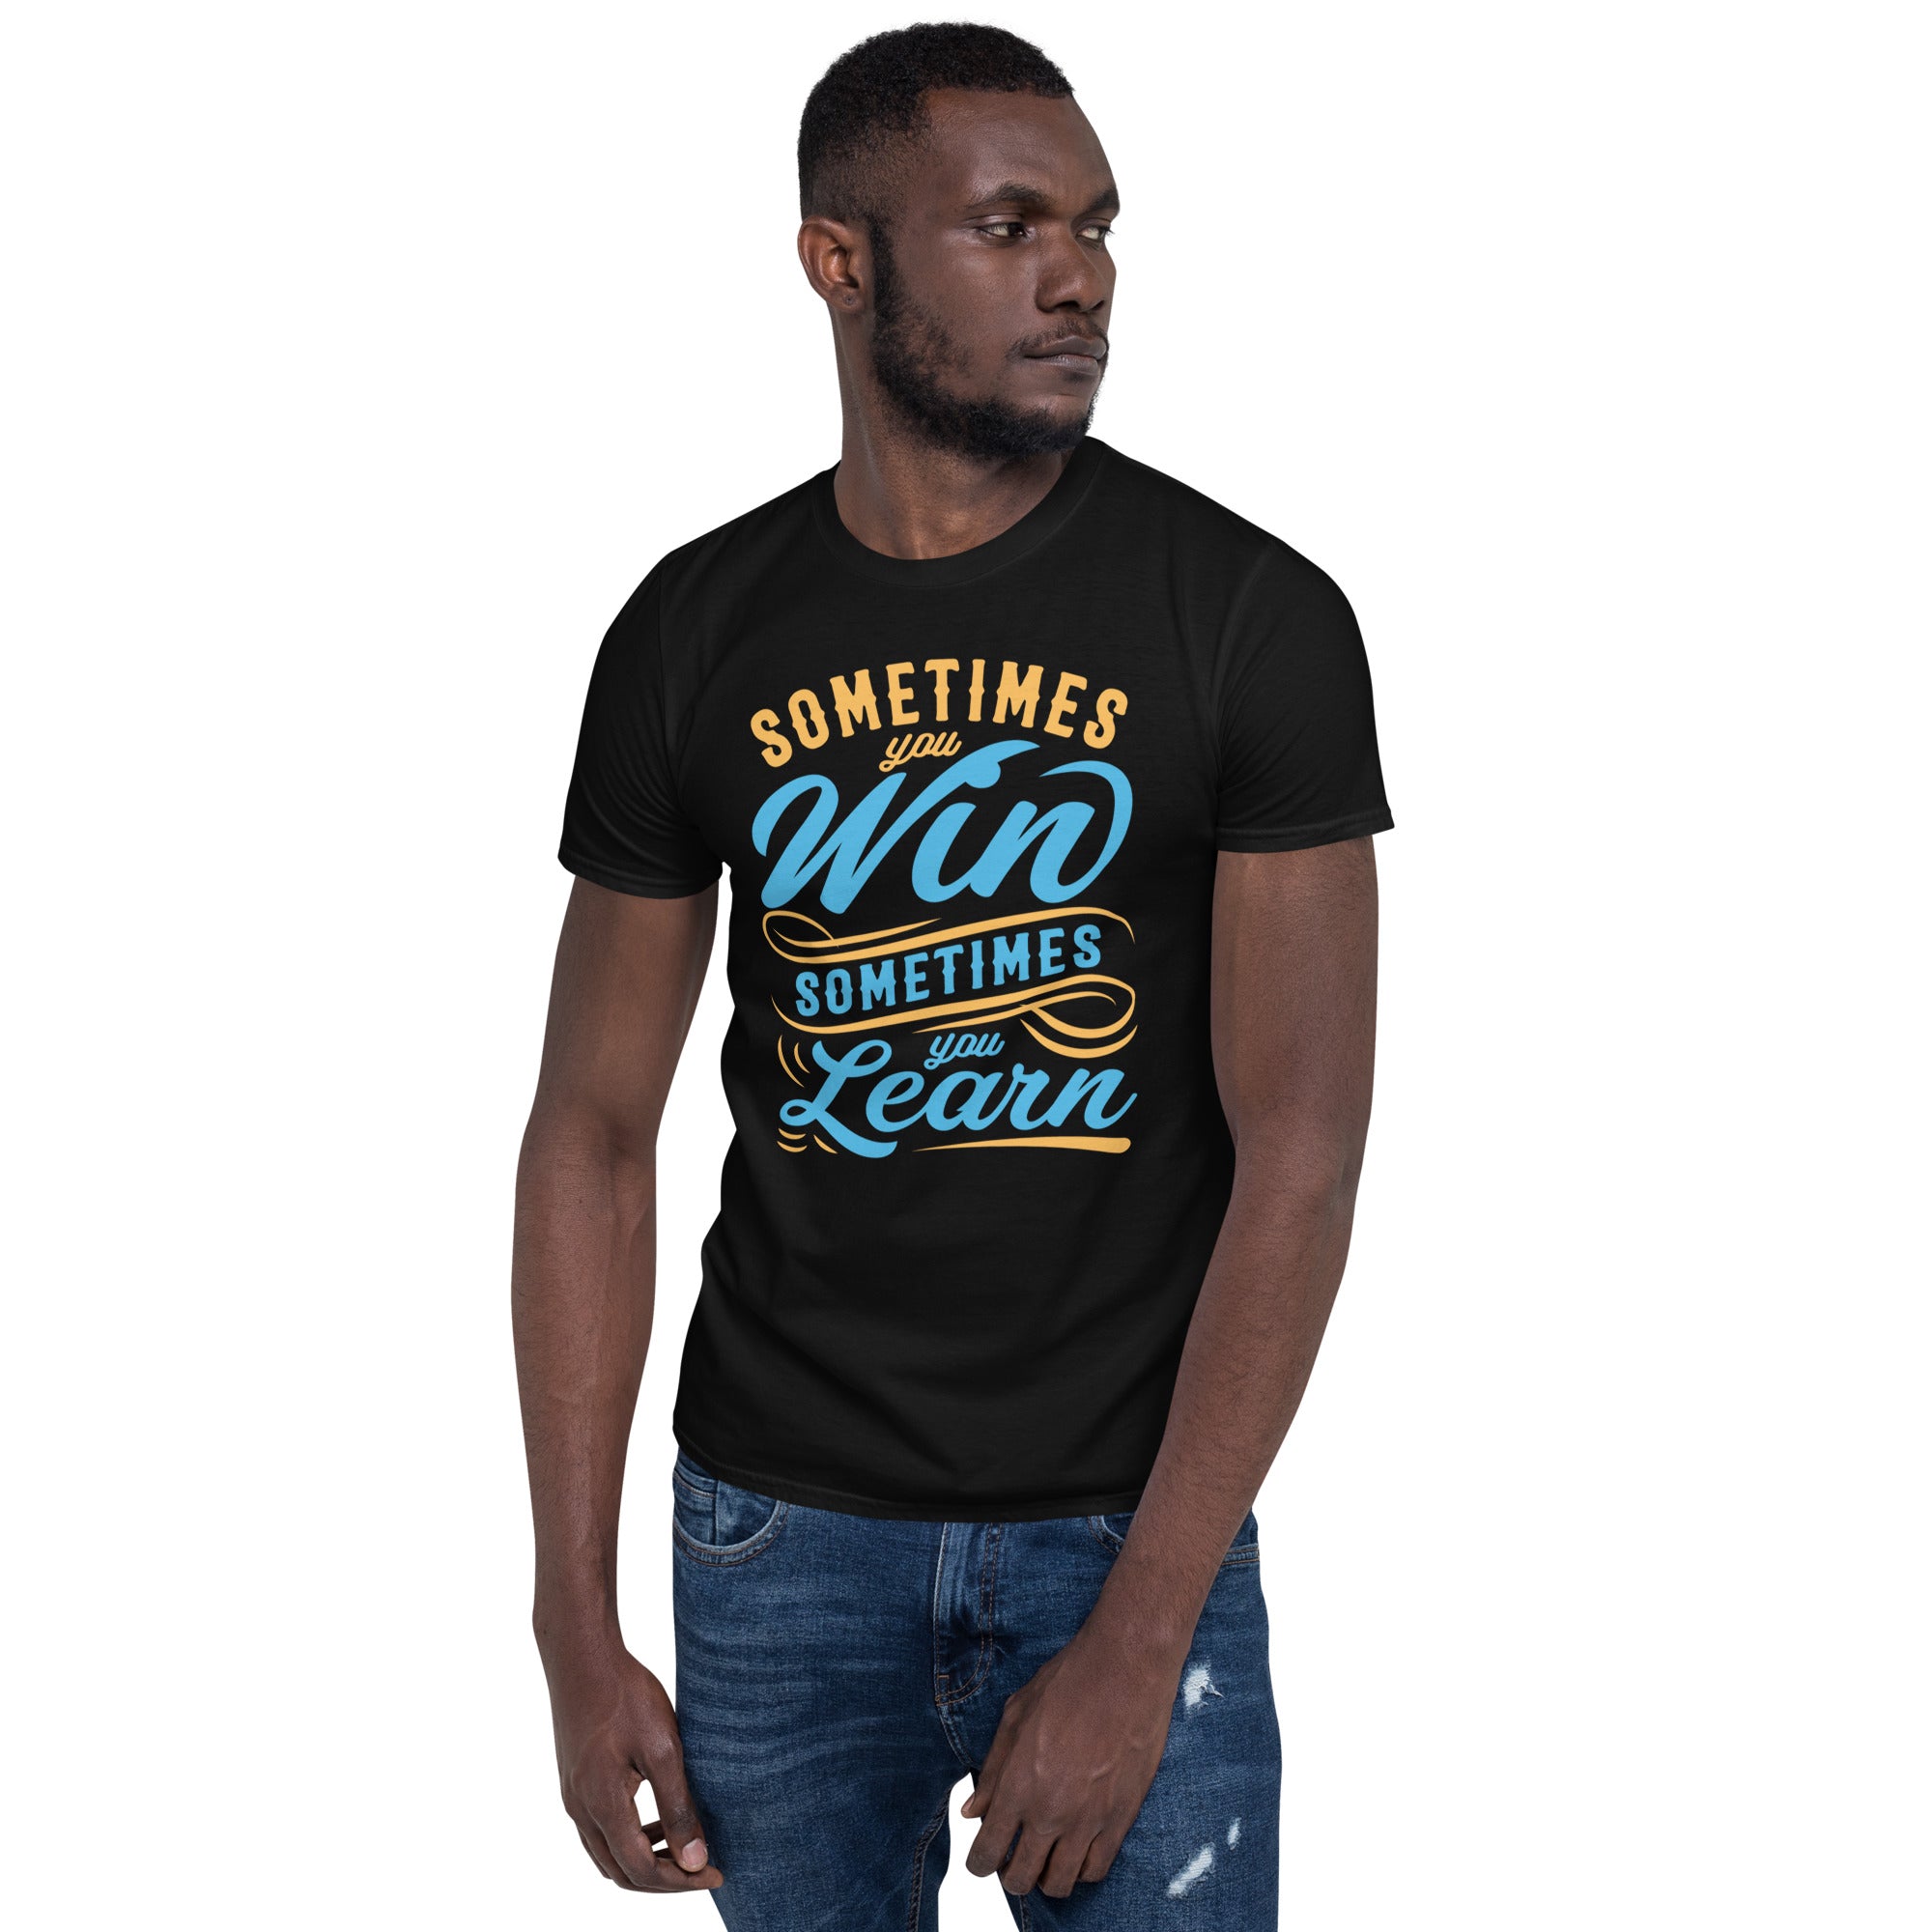 Sometimes You Win & Sometimes You Lose - Short-Sleeve Unisex T-Shirt